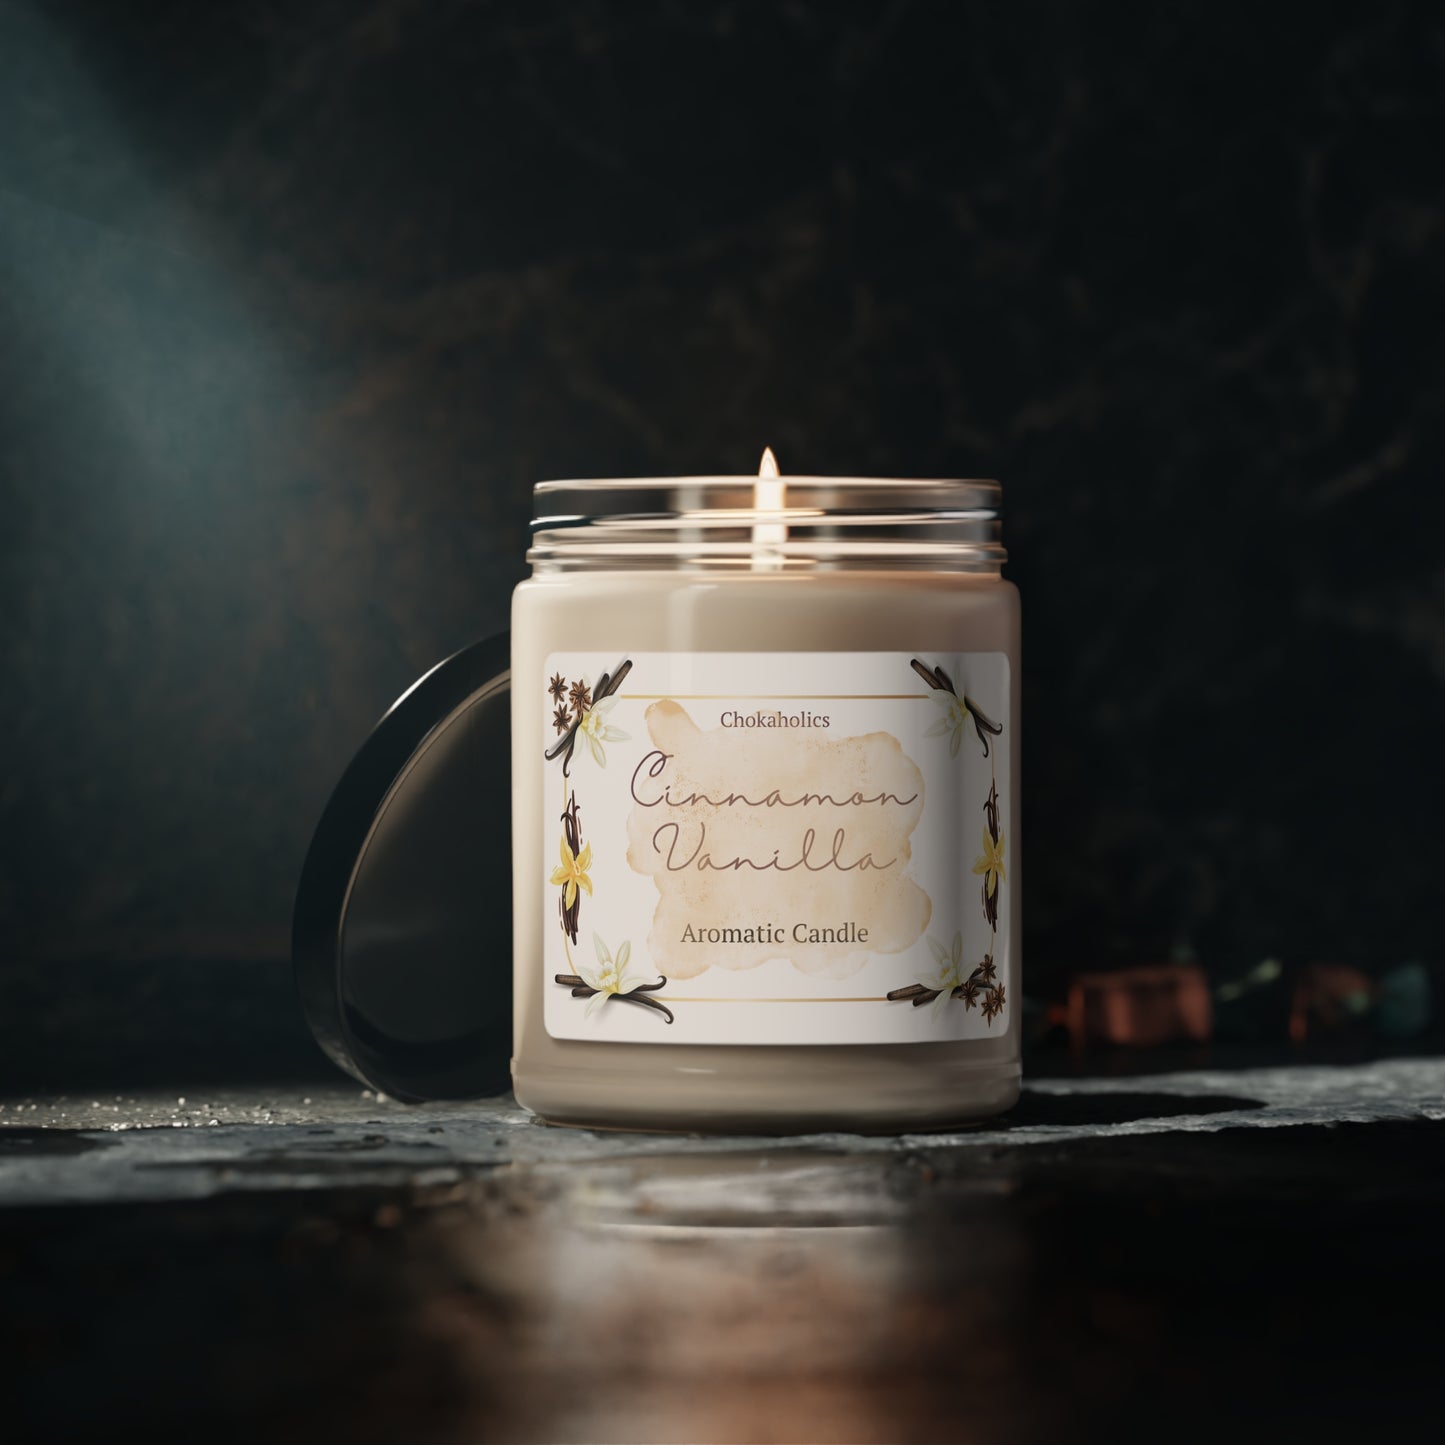 Tranquil Bliss Aromatic Scented Soy Candle Series